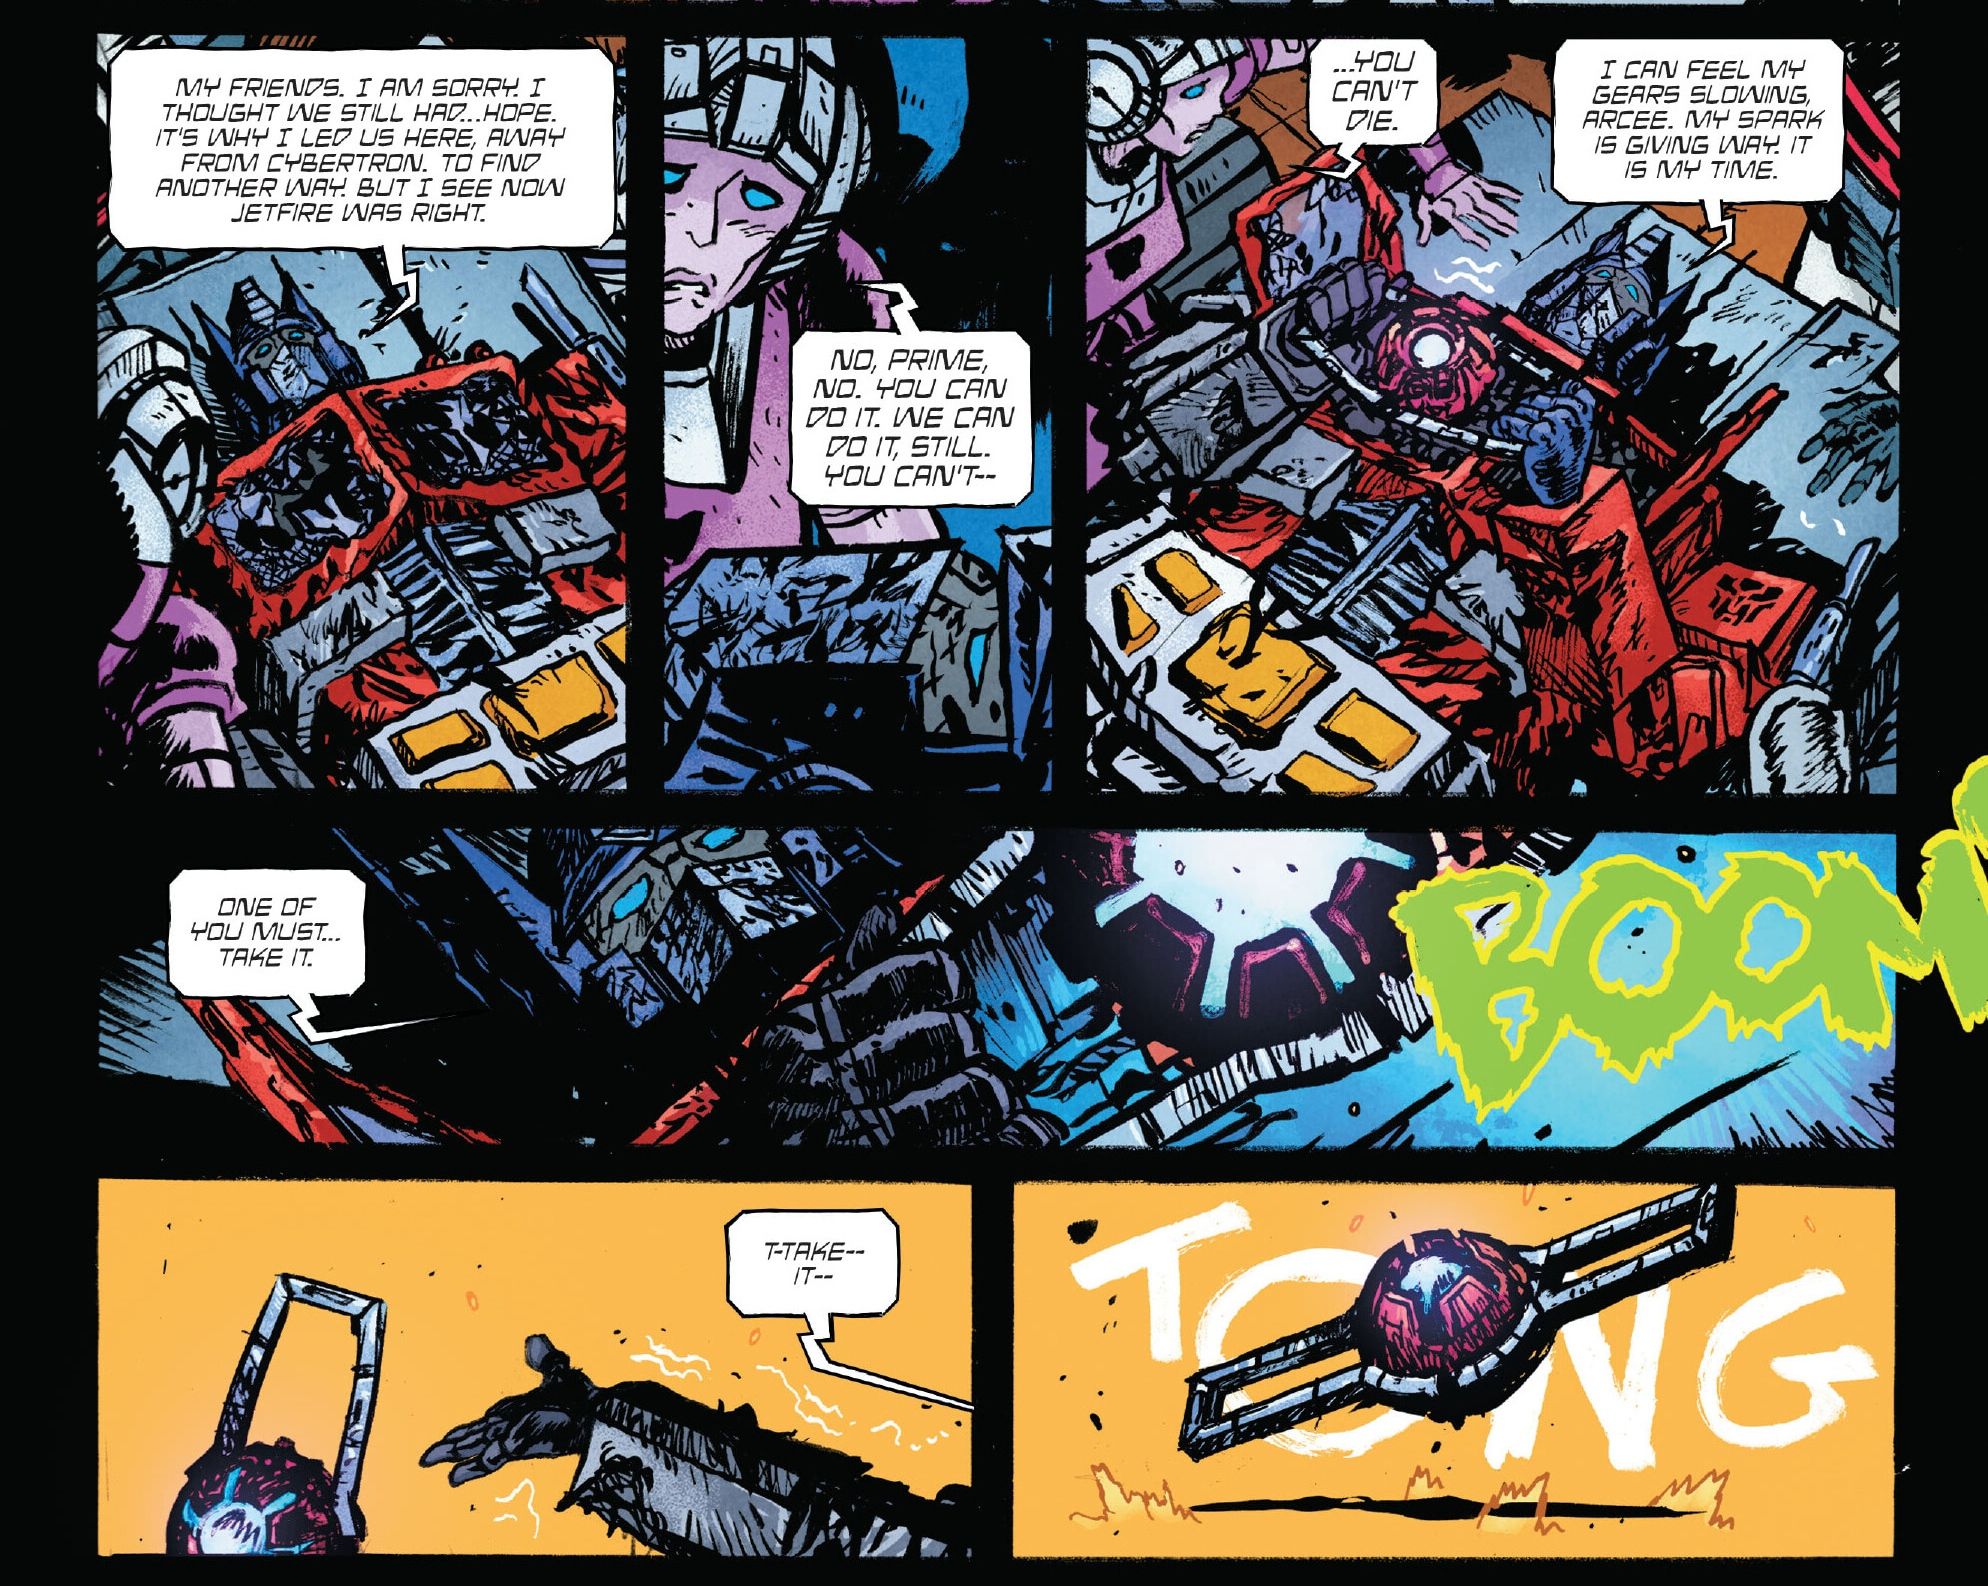 New Transformers Death Permanently Rewrites the Connection Between Humans & Transformers